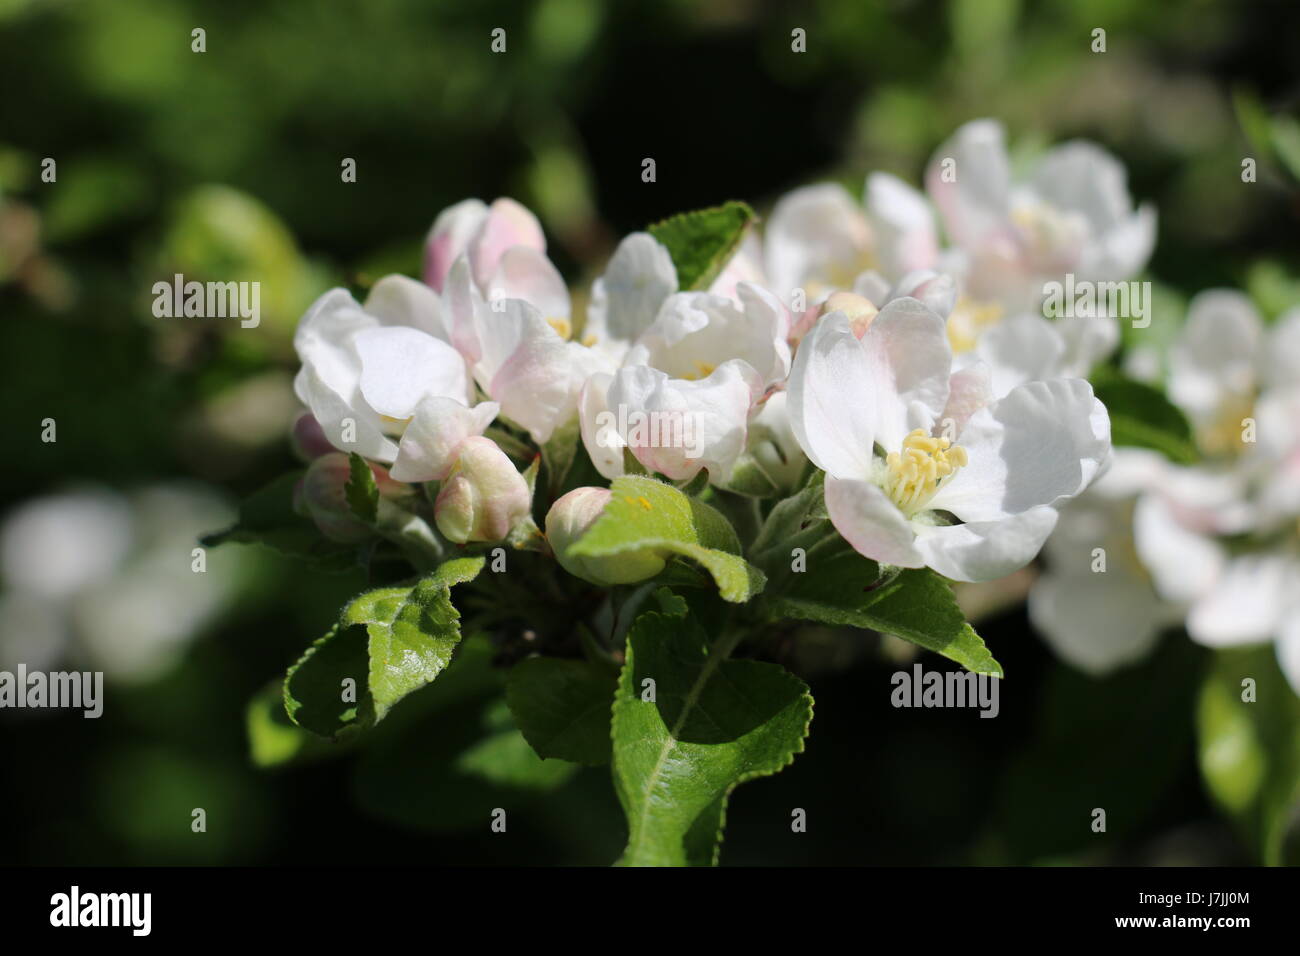 Cluster of white and pink Discovery Apple Blossom flowers blooming in the Spring sunshine in Shropshire, England Stock Photo